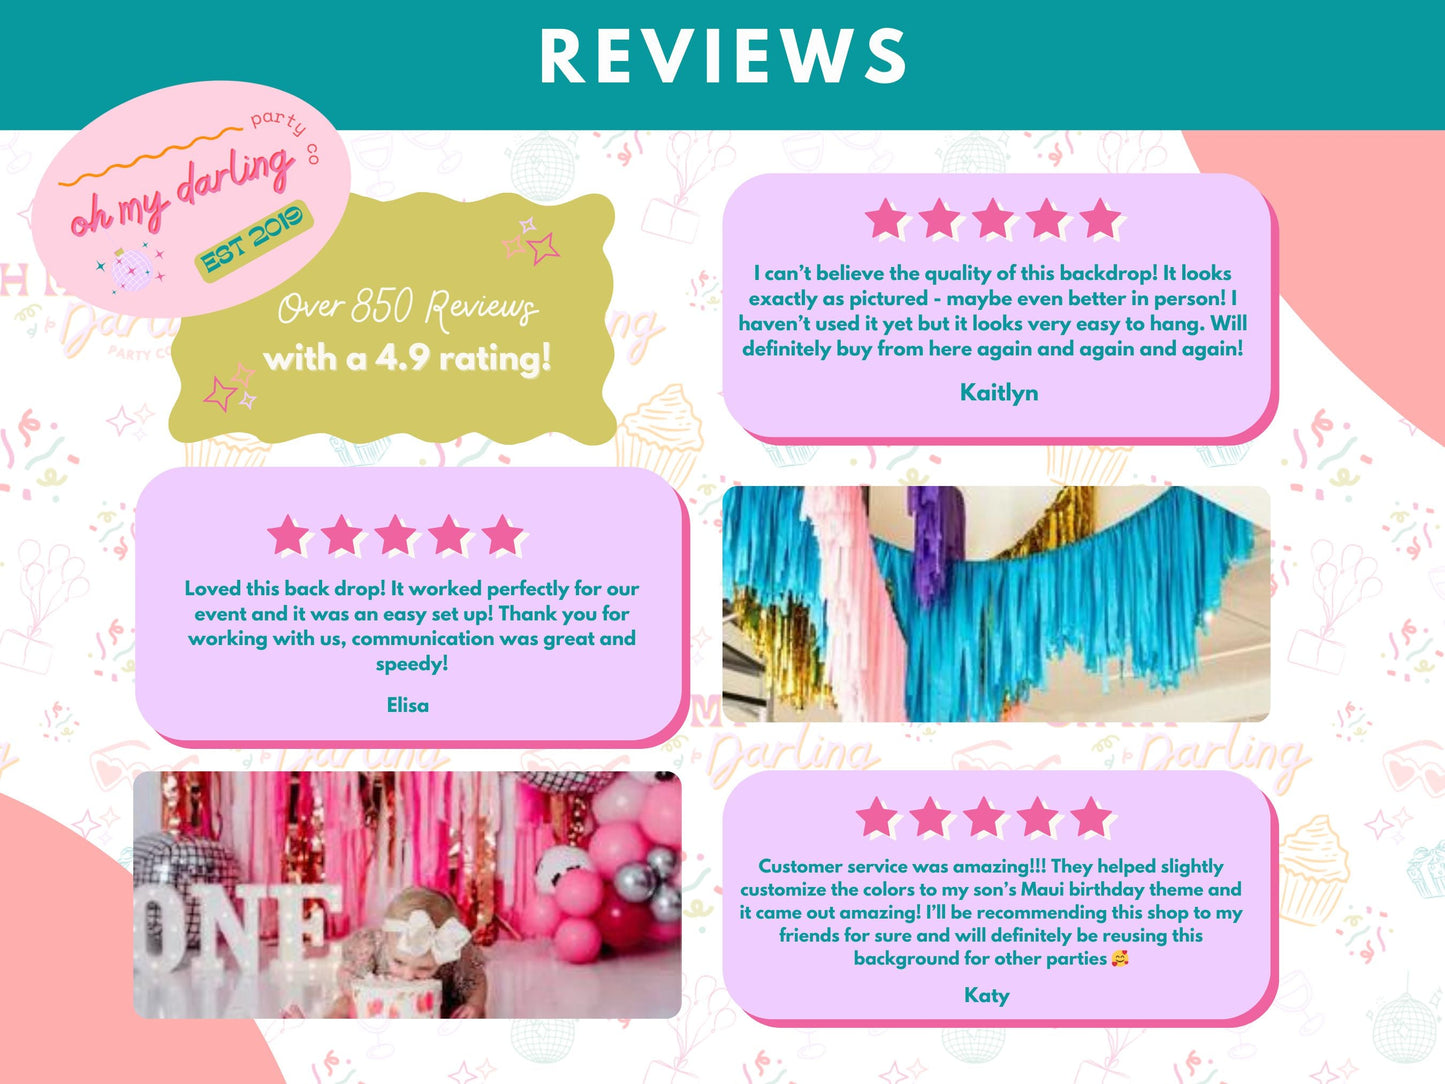 The Got Your Bash Fringe Backdrop-Fringe Backdrop-Party Decor-Oh My Darling Party Co-Oh My Darling Party Co-baby pink, bachelorette, bachelorette party, backdrops for party, balloon garlands, be my valentine, birthday decorations, birthday girl, Birthday Party, candy pink, christmas 22, default, fringe garland, Fringe Streamers, girl birthday, got your bash, happy birthday, happy birthday collection, new years, OMDPC, orange, Orange & Pink, ORANGE BACKDROP, oranges, party backdrops, Pink, pink and orange, p